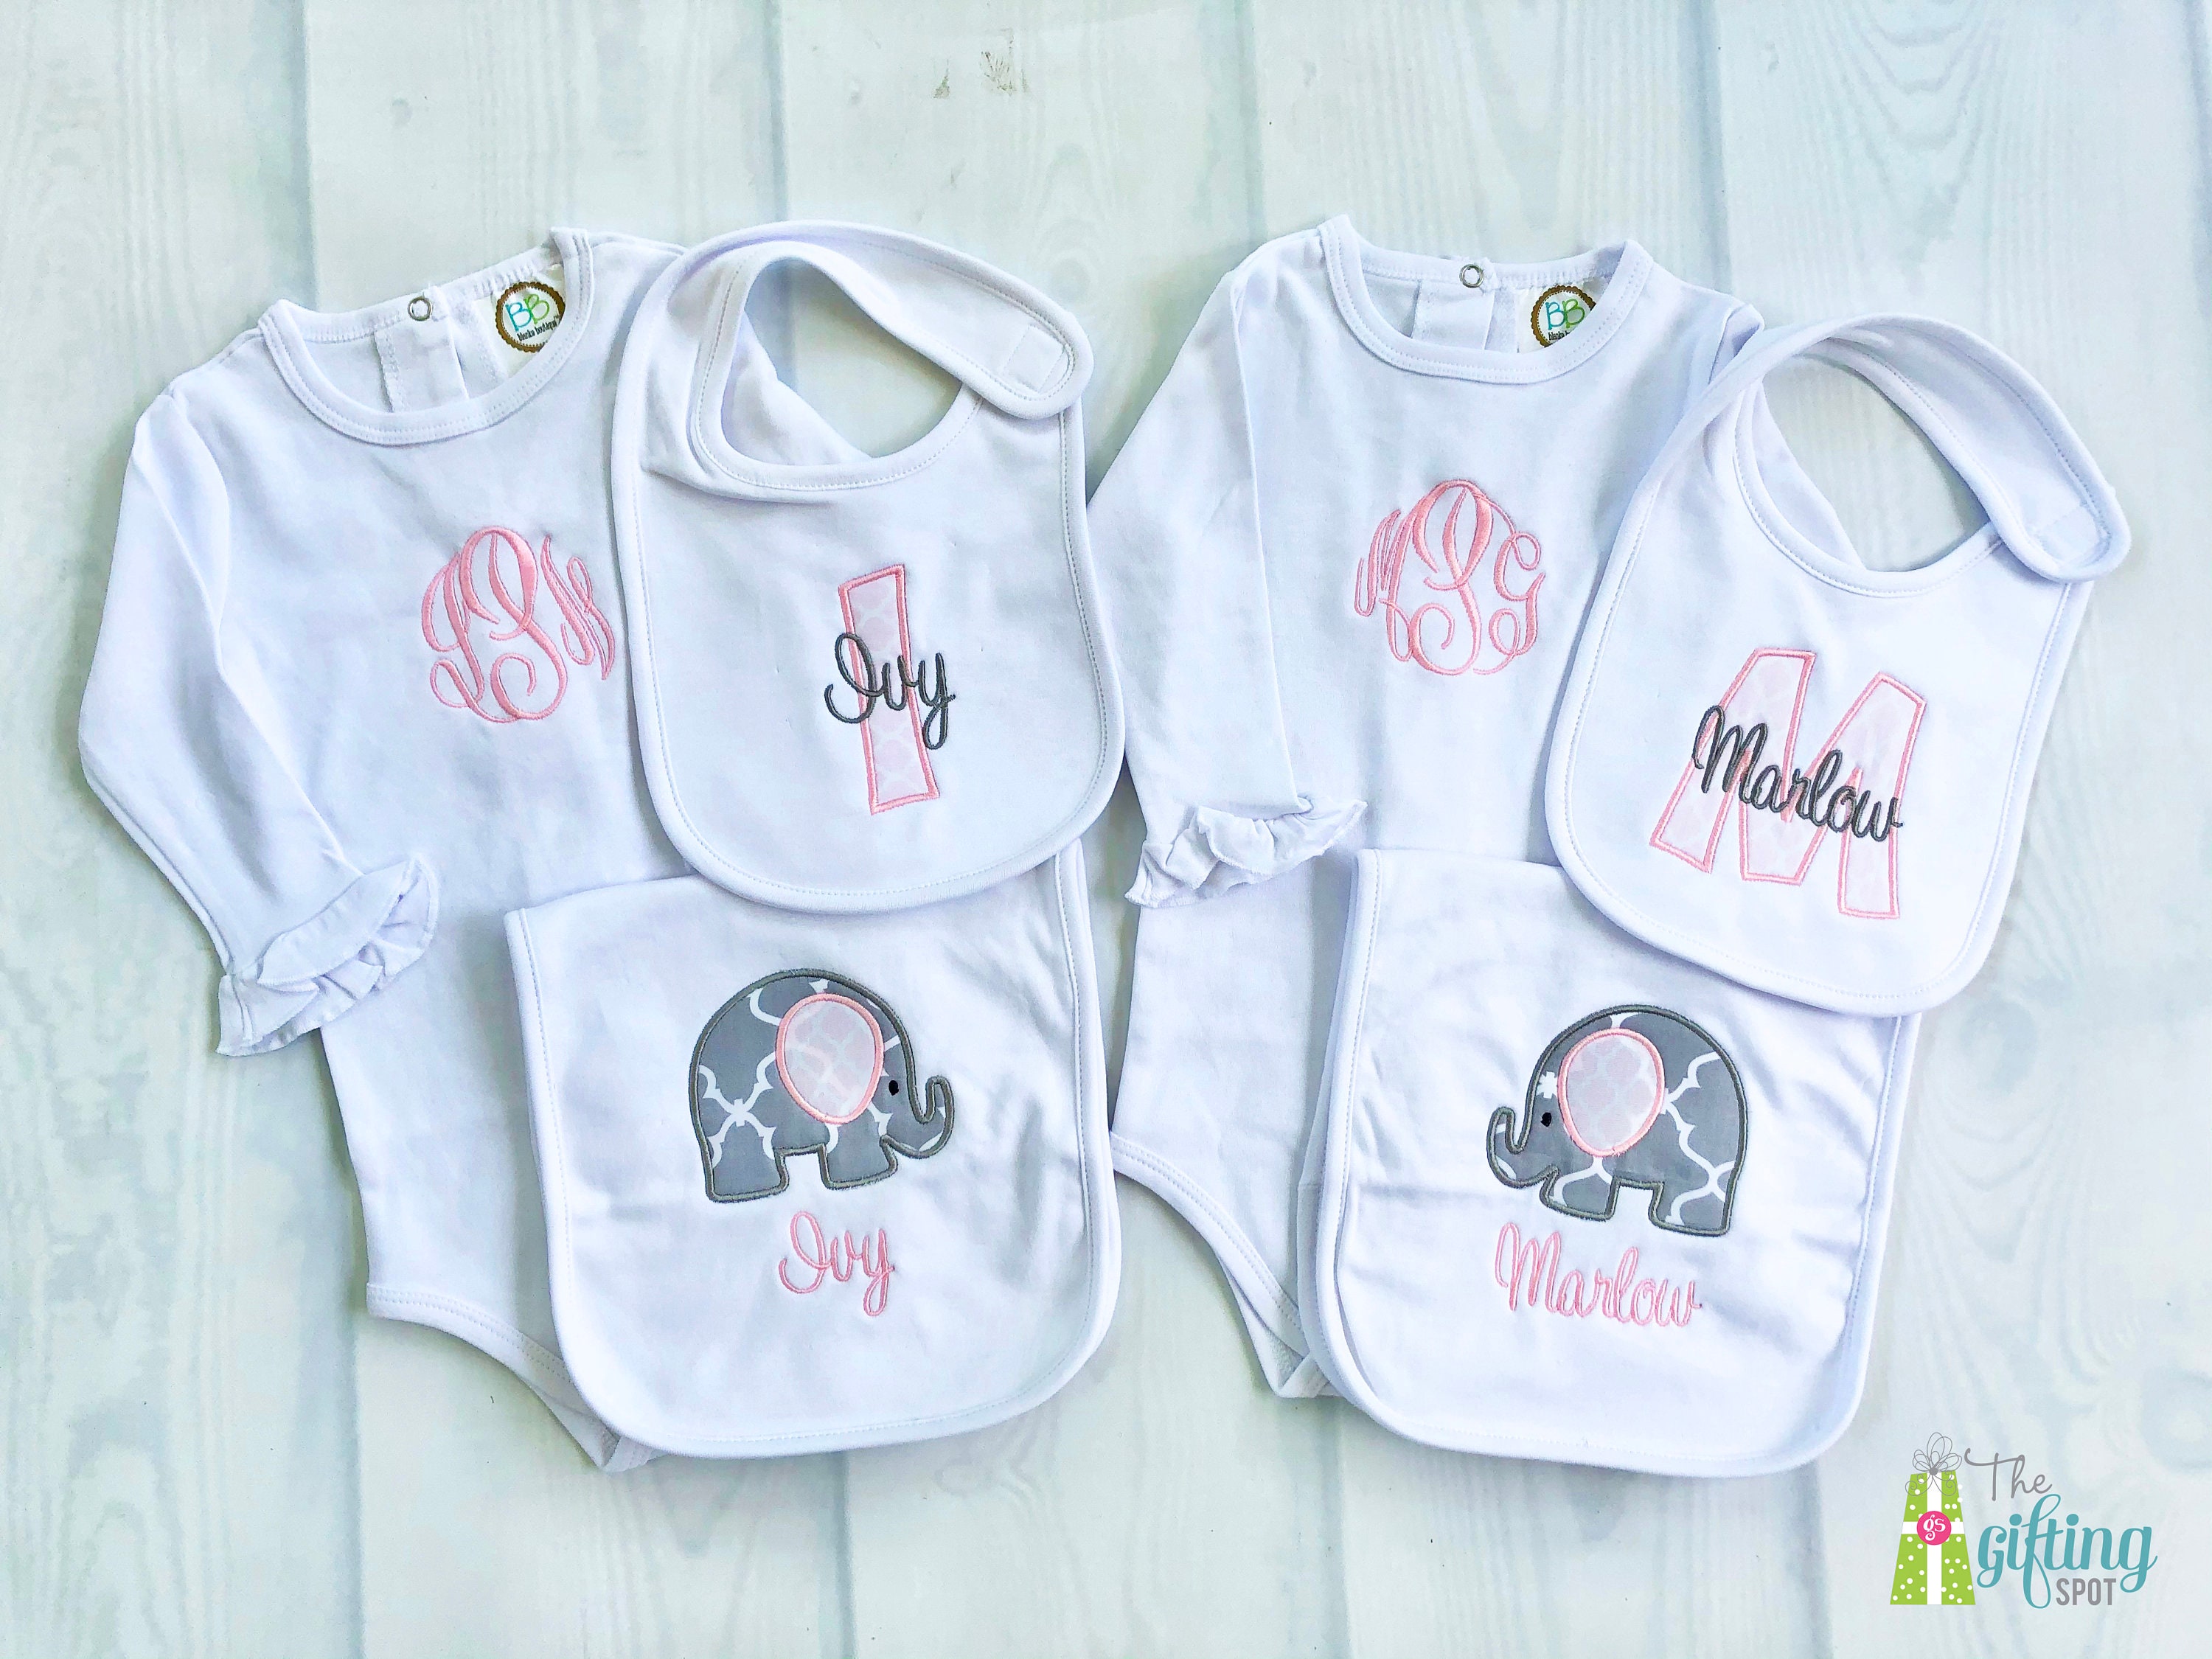 Baby Boy Gifts, New Baby Gift, Baby Boy Personalized Gifts,, 46% OFF